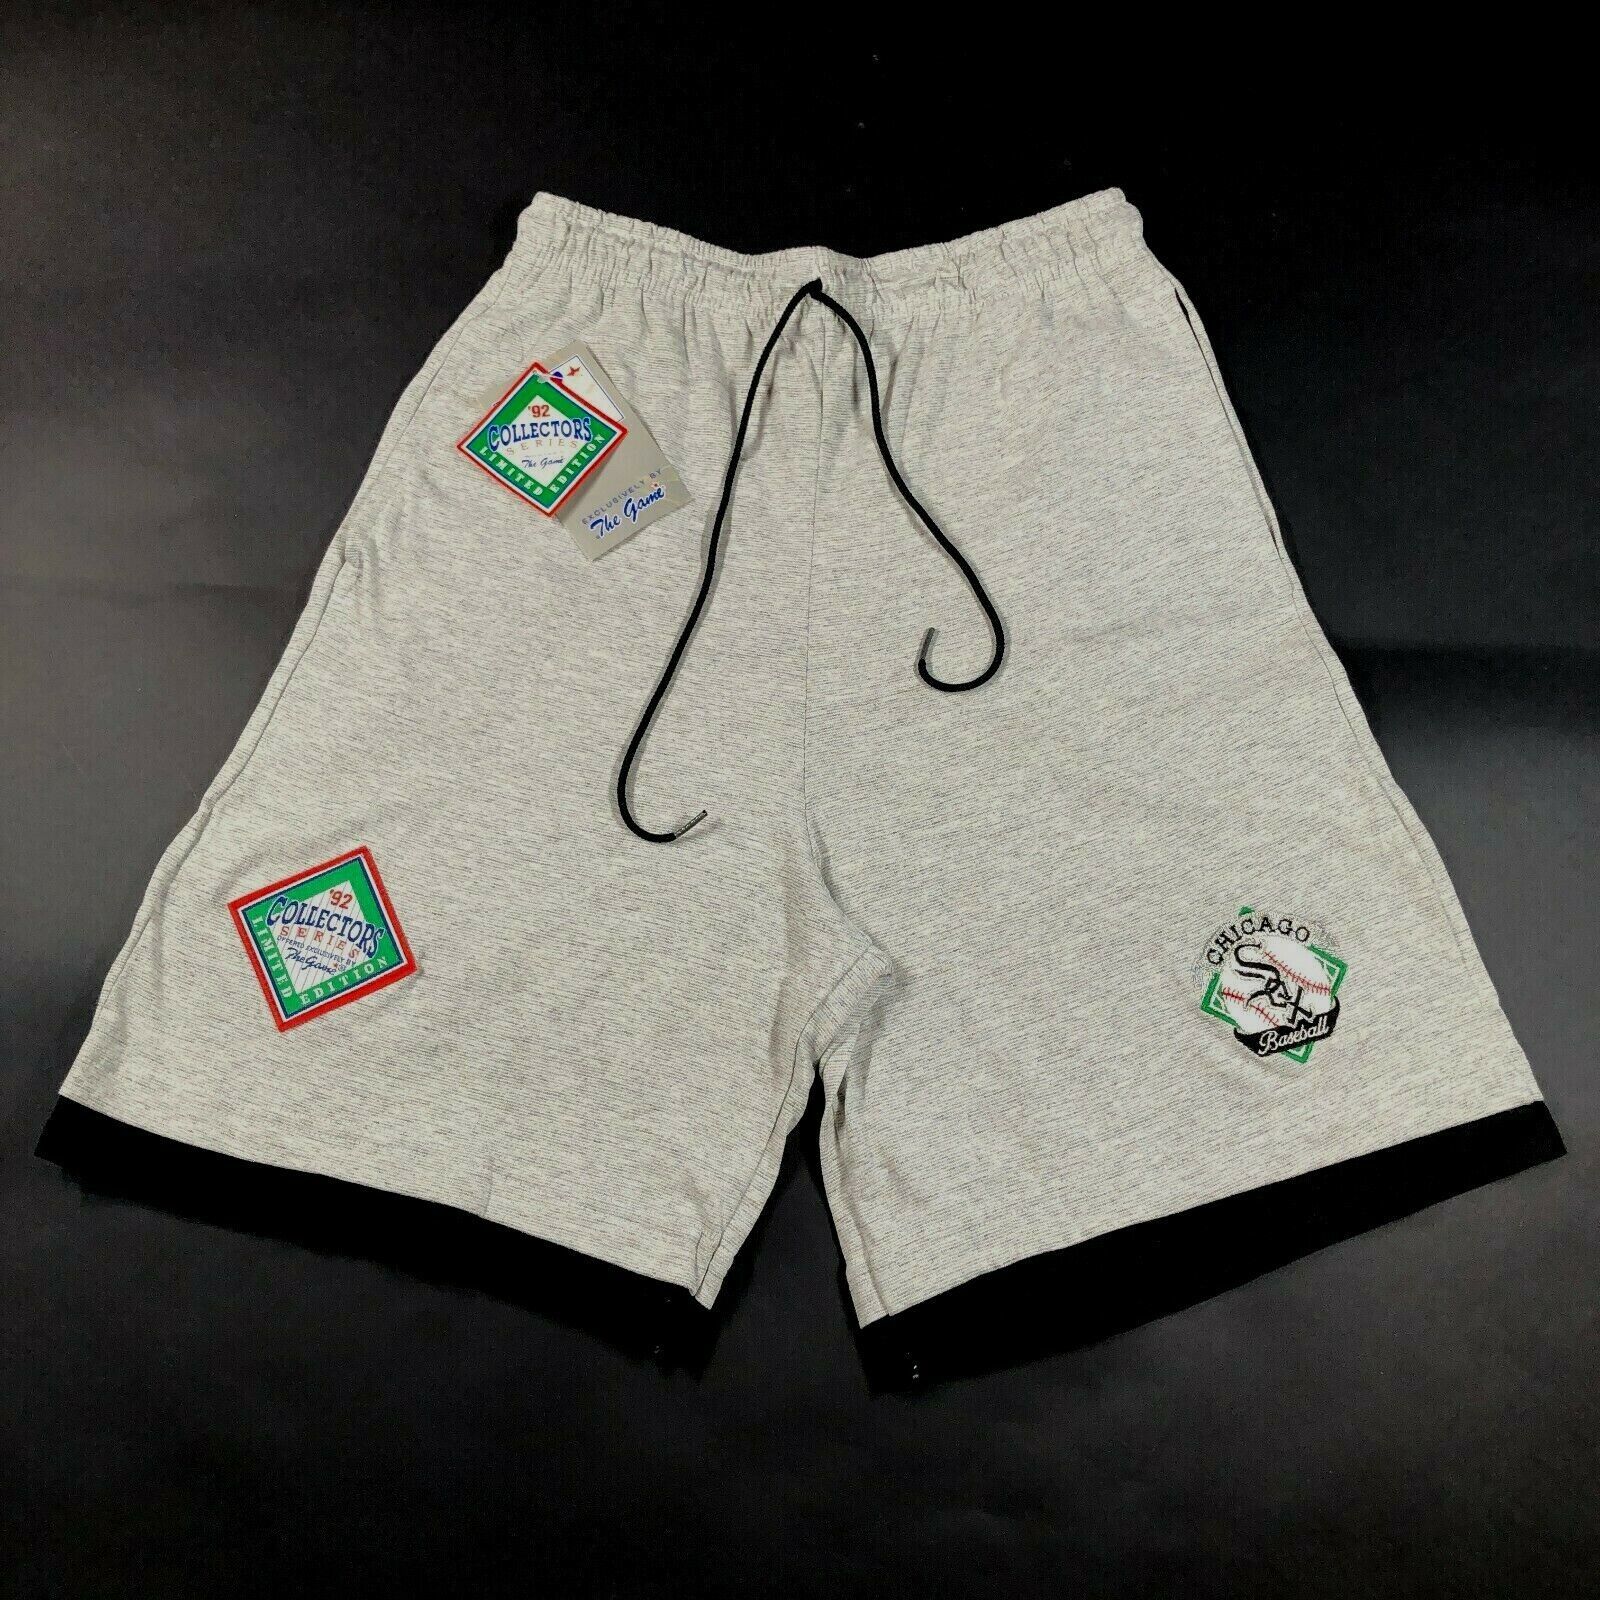 NEW Vintage Chicago White Sox Gym Shorts Mens L Gray Embroidered Cotton The Game - $21.04